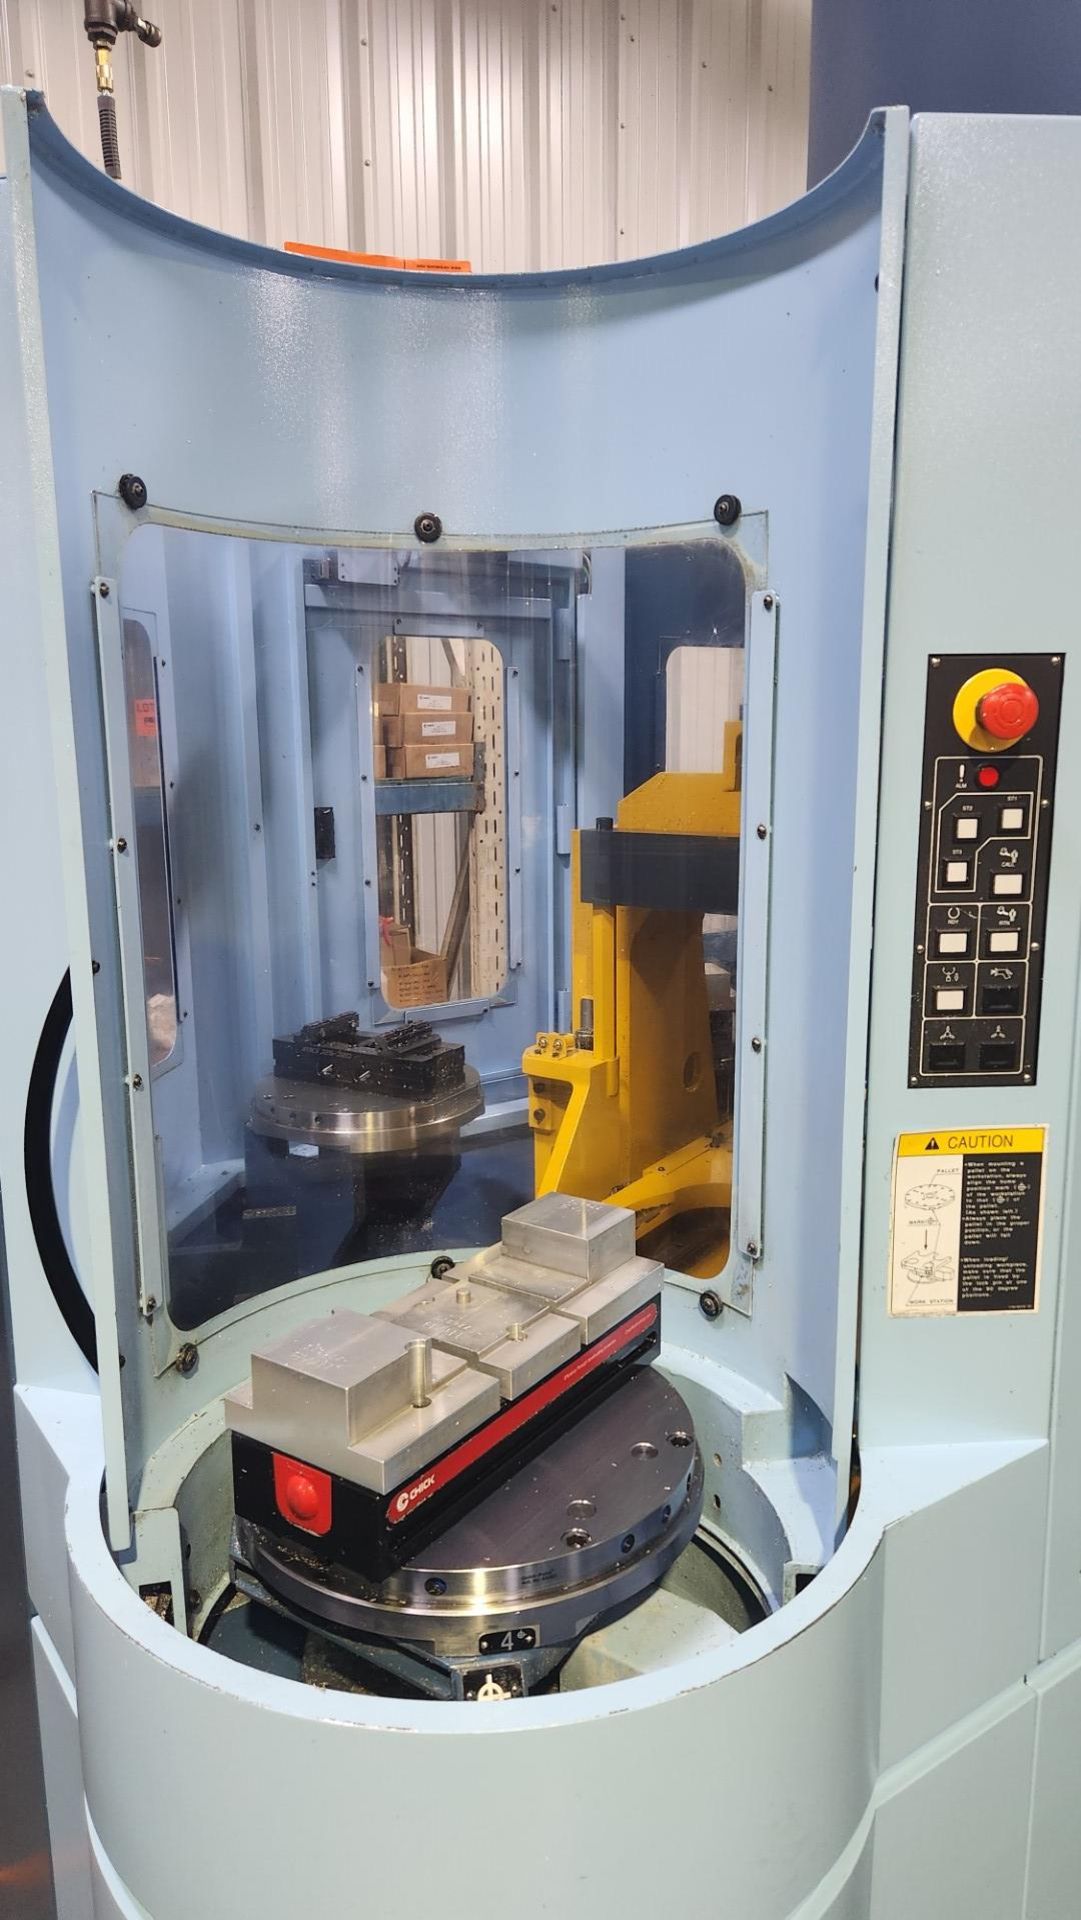 MATSUURA (2019) MX-520 PC4 MULTI-PALLET FULL 5-AXIS HIGH-SPEED CNC VERTICAL MACHINING CENTER WITH - Image 28 of 30